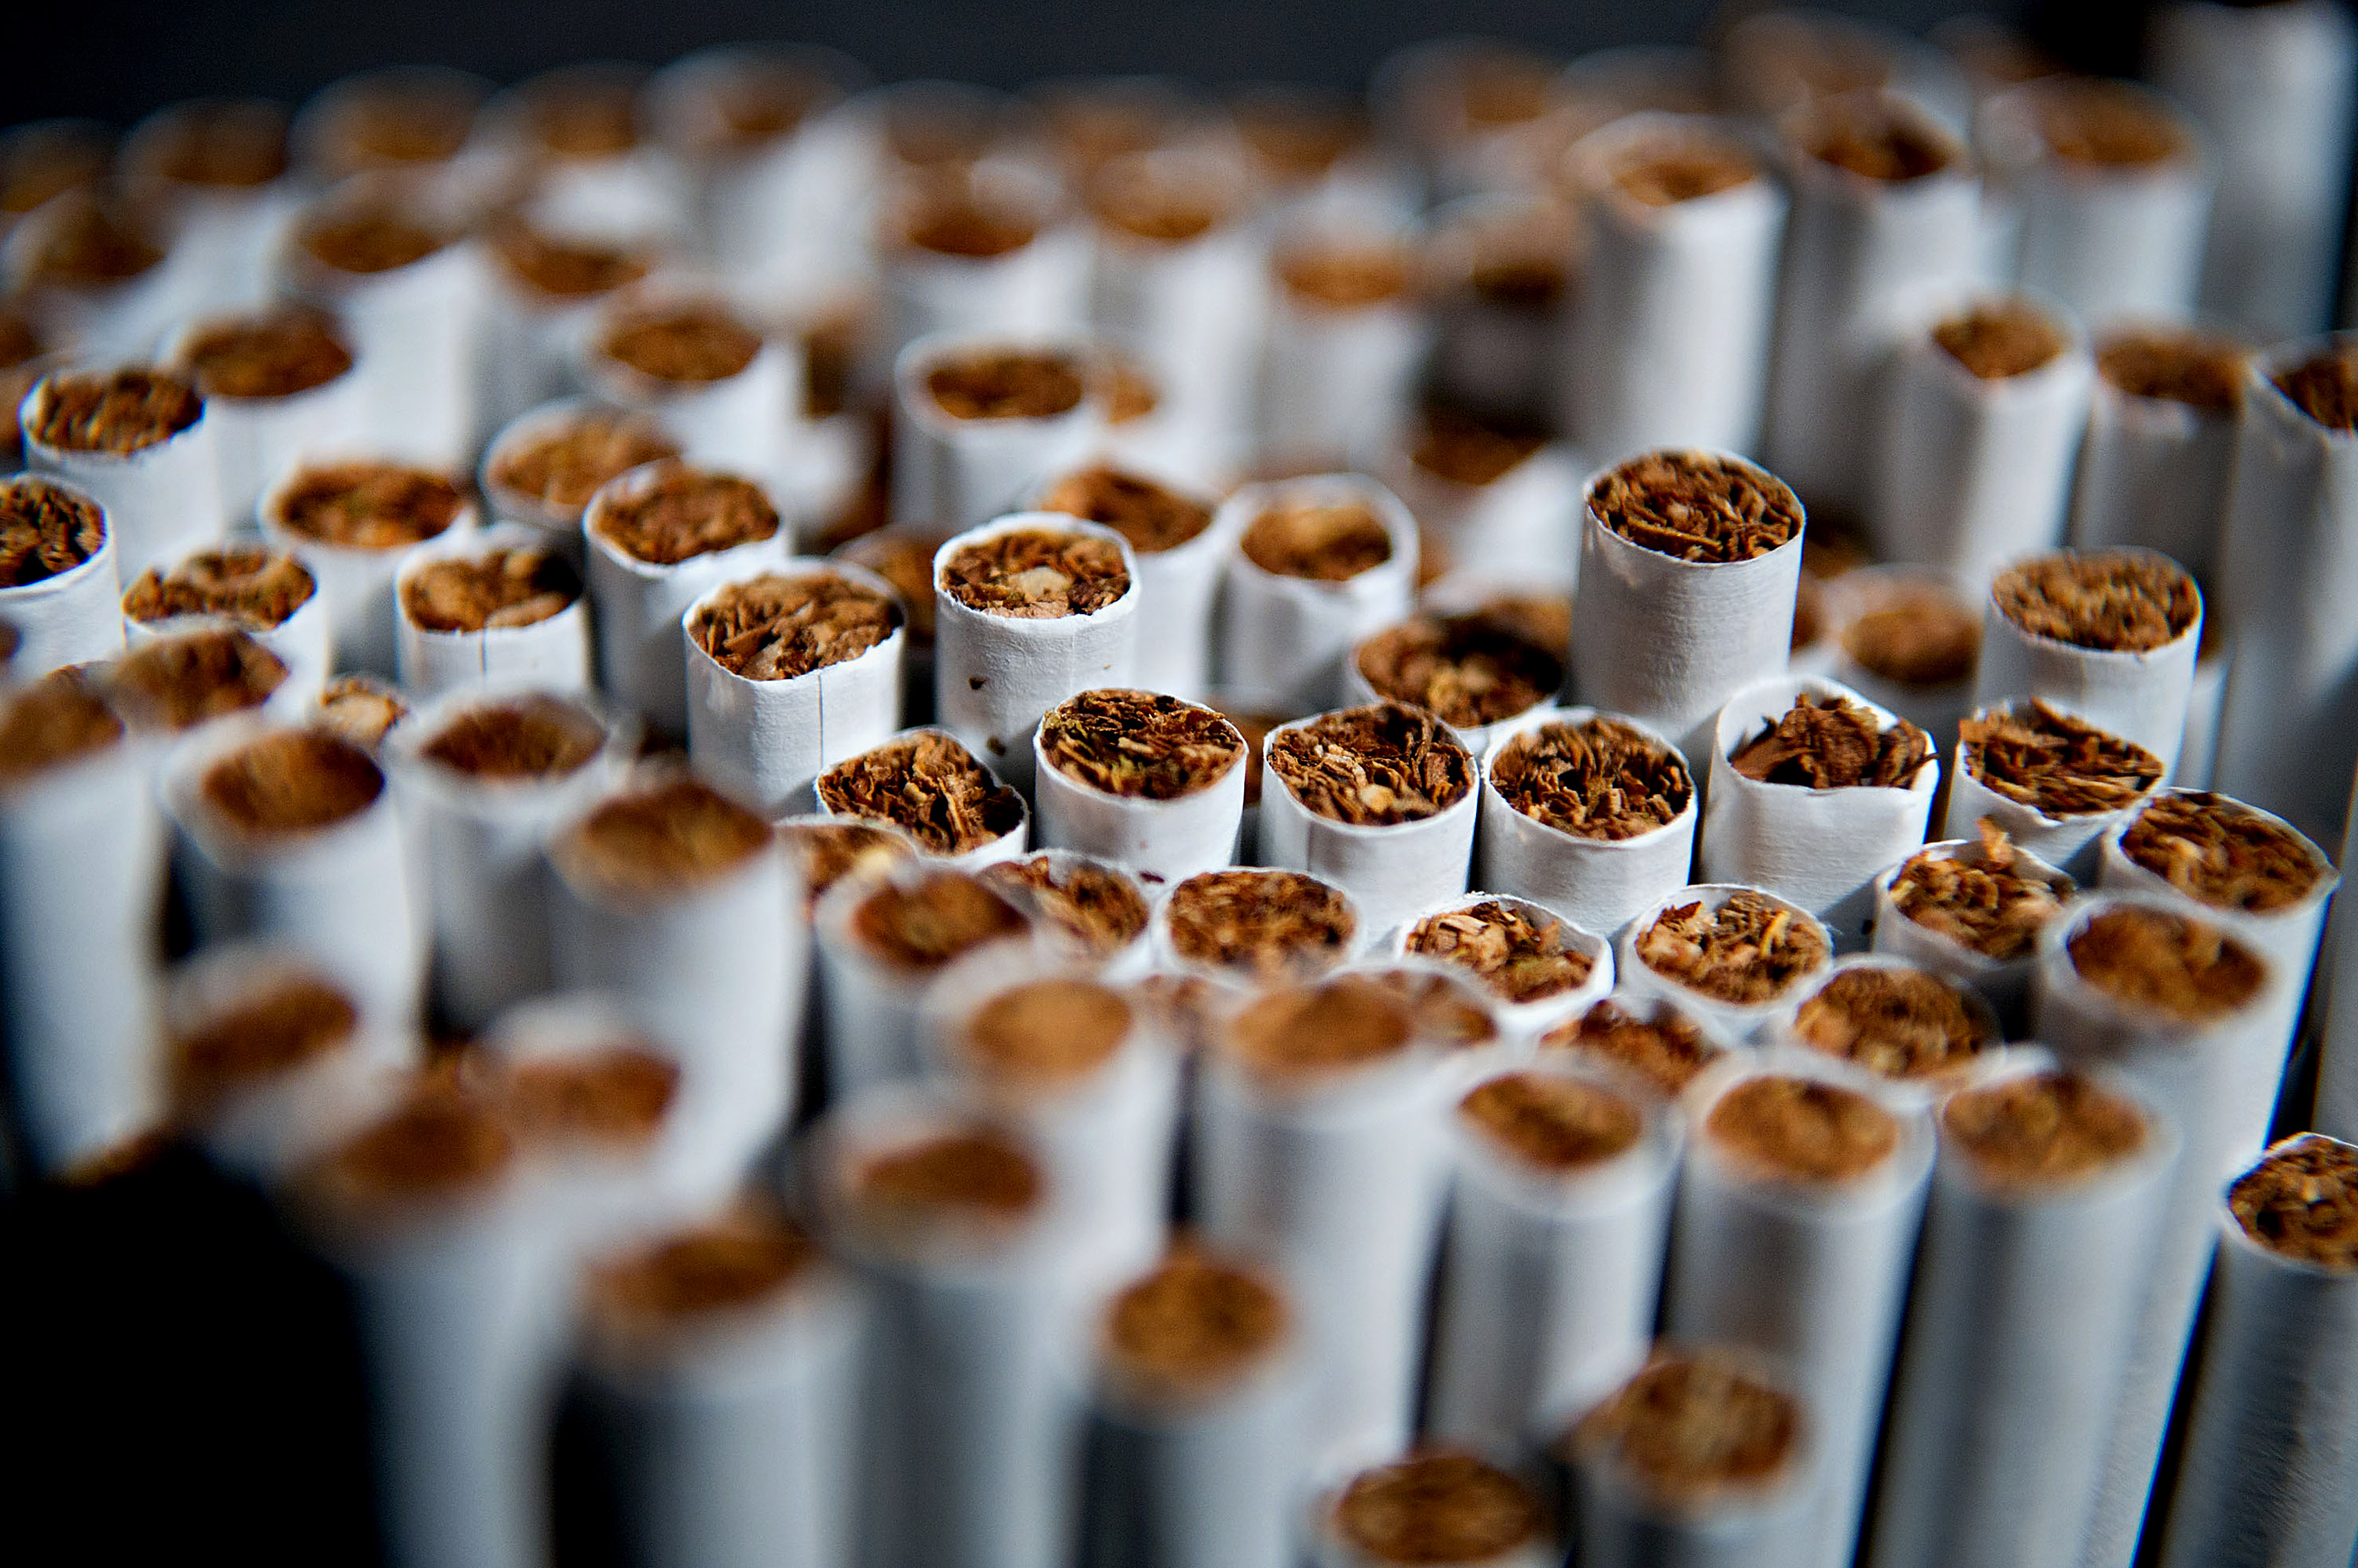 Several brands of cigarettes are arranged for a photograph in Tiskilwa, Illinois, U.S., on April 17, 2012. (Bloomberg/Getty Images)